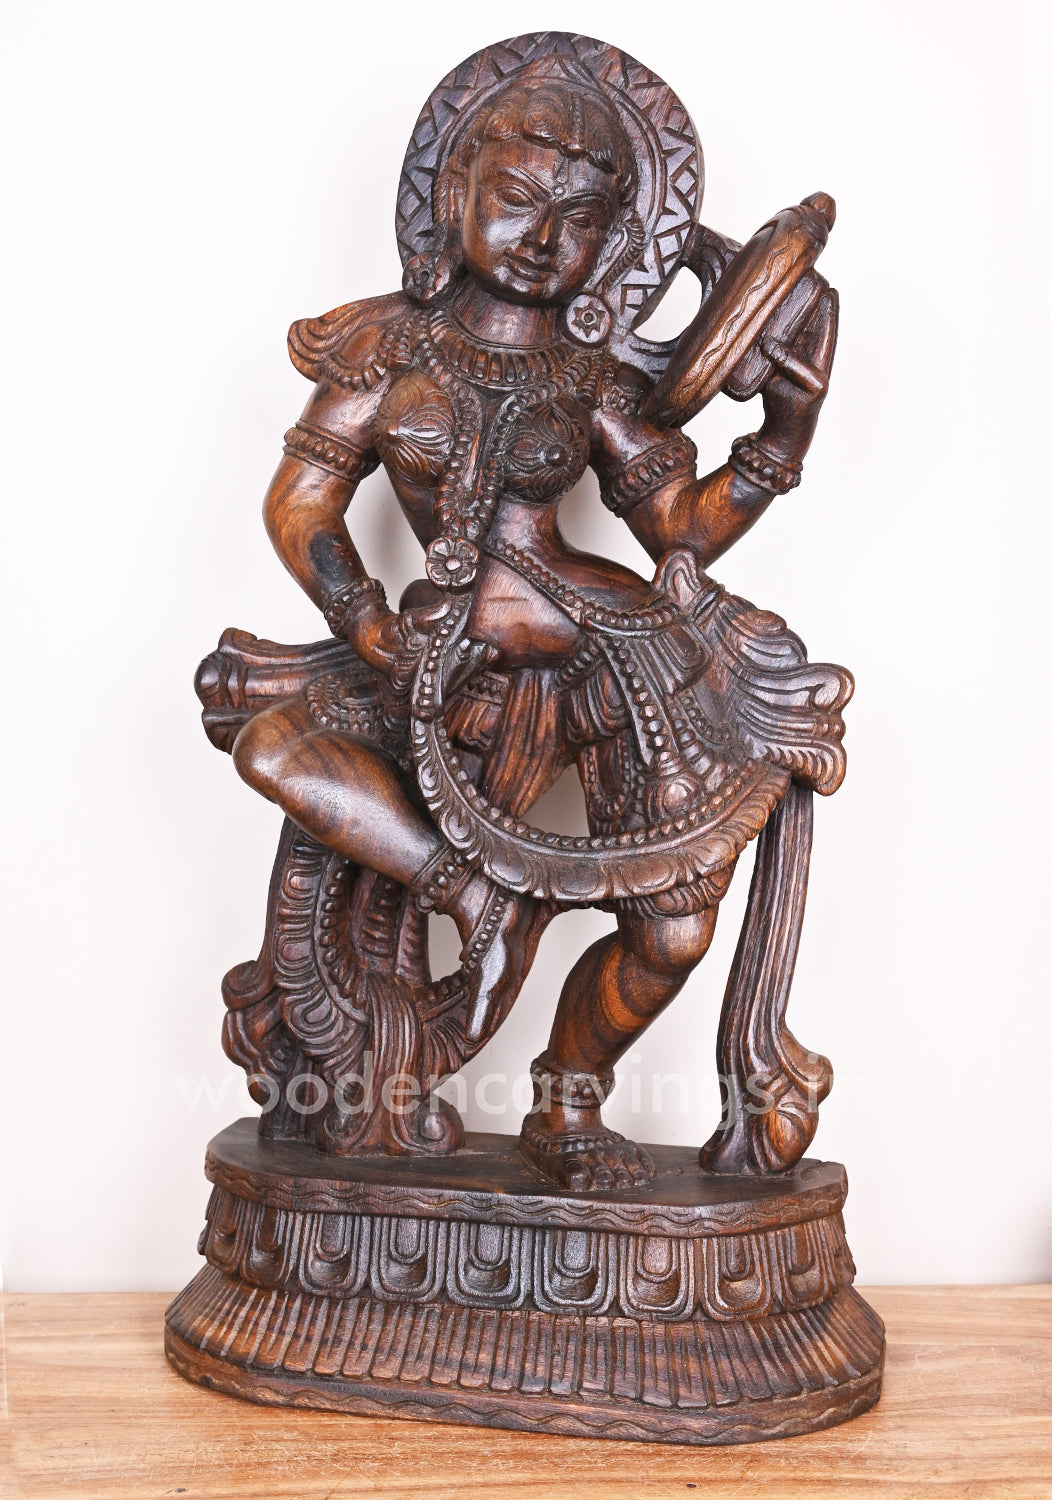 Impressive Apsara Standing on Base and Holding Mirror in Her Beautiful hand Wooden Sculpture 30"